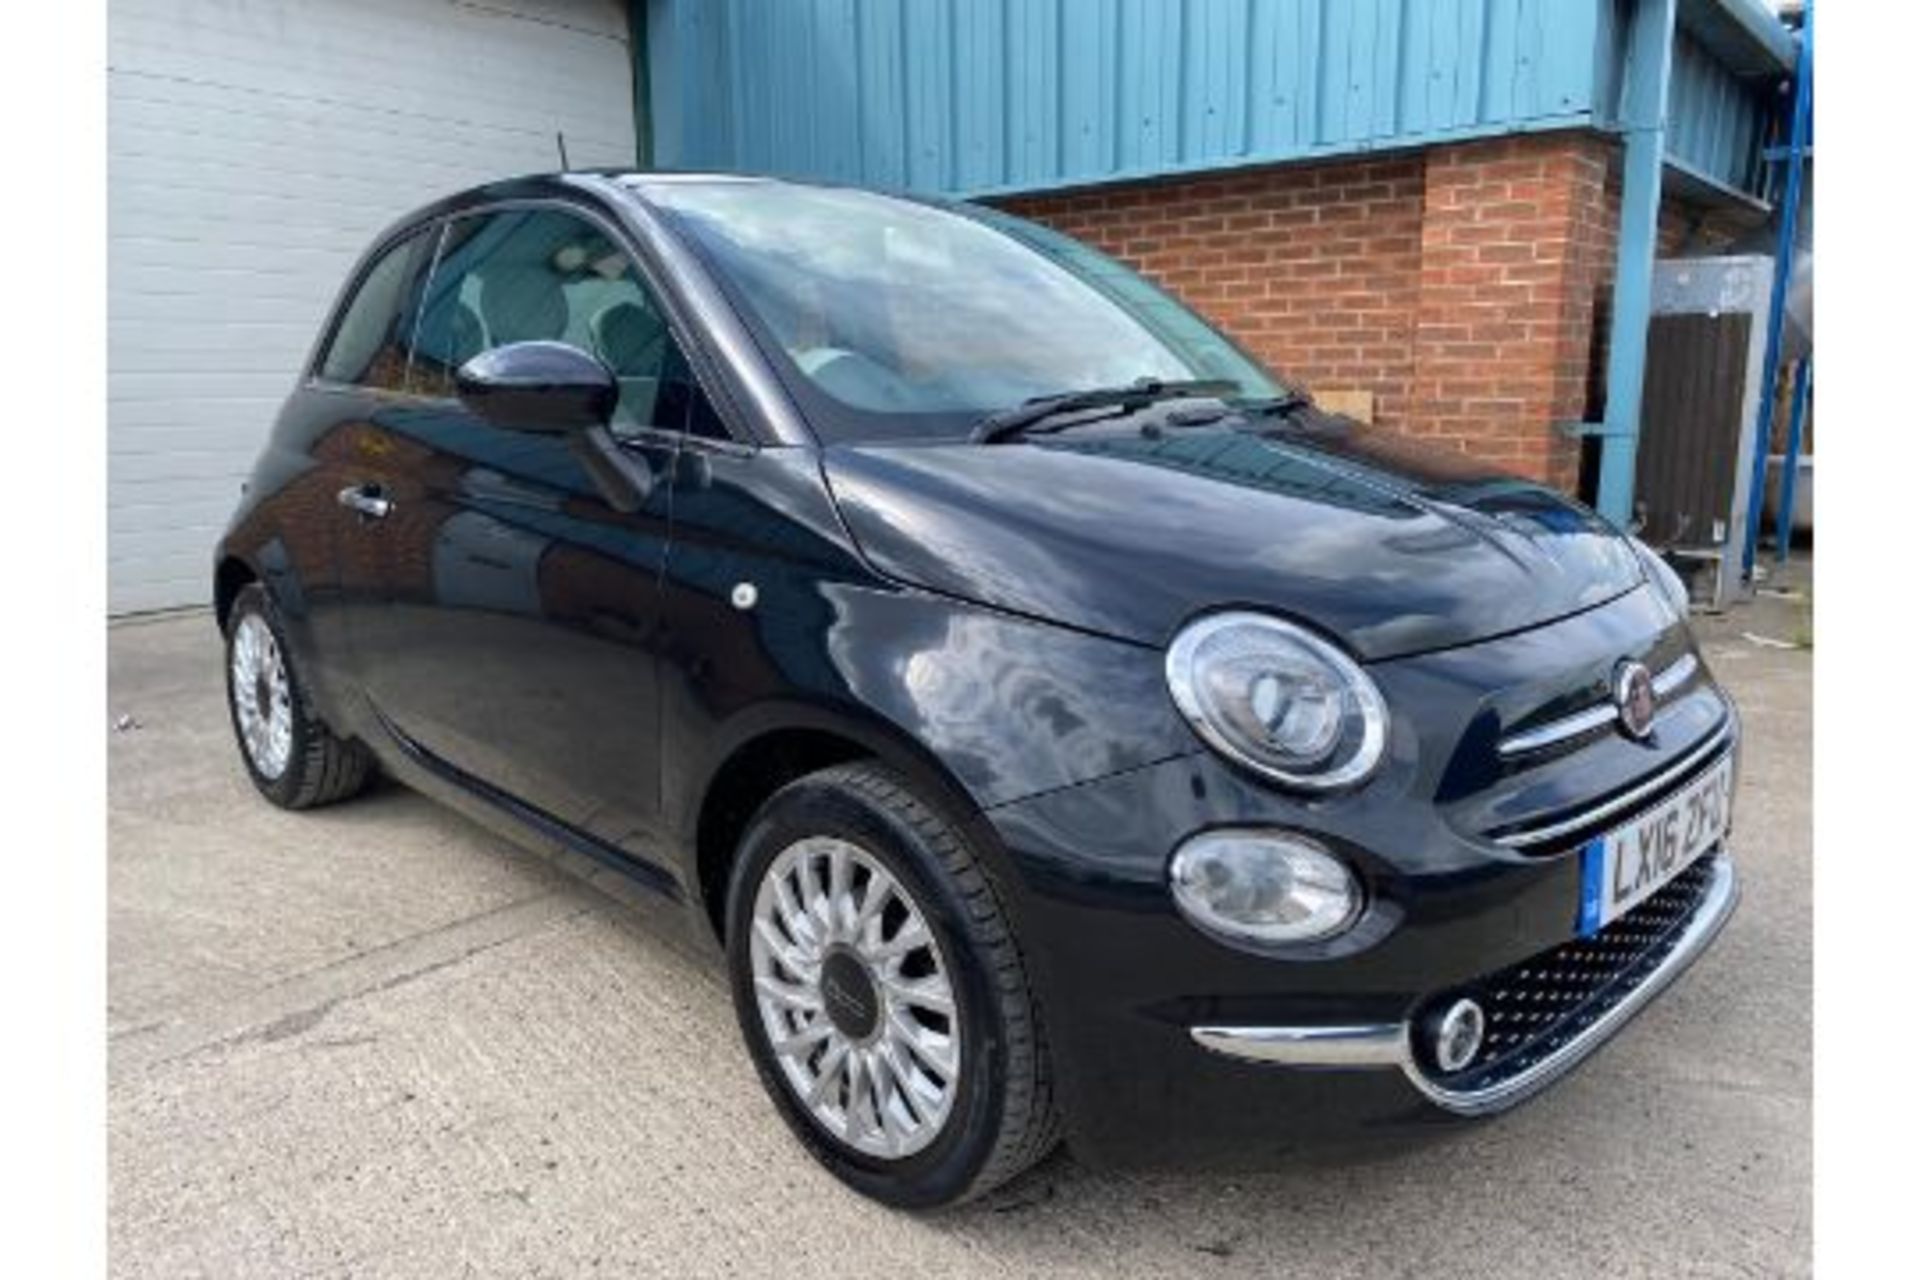 (Reserve Met) Fiat 500 1.2 Lounge - 2016 16 Reg - Parking Sensors - Panoramic Roof - ONLY 46K Miles - Image 8 of 25